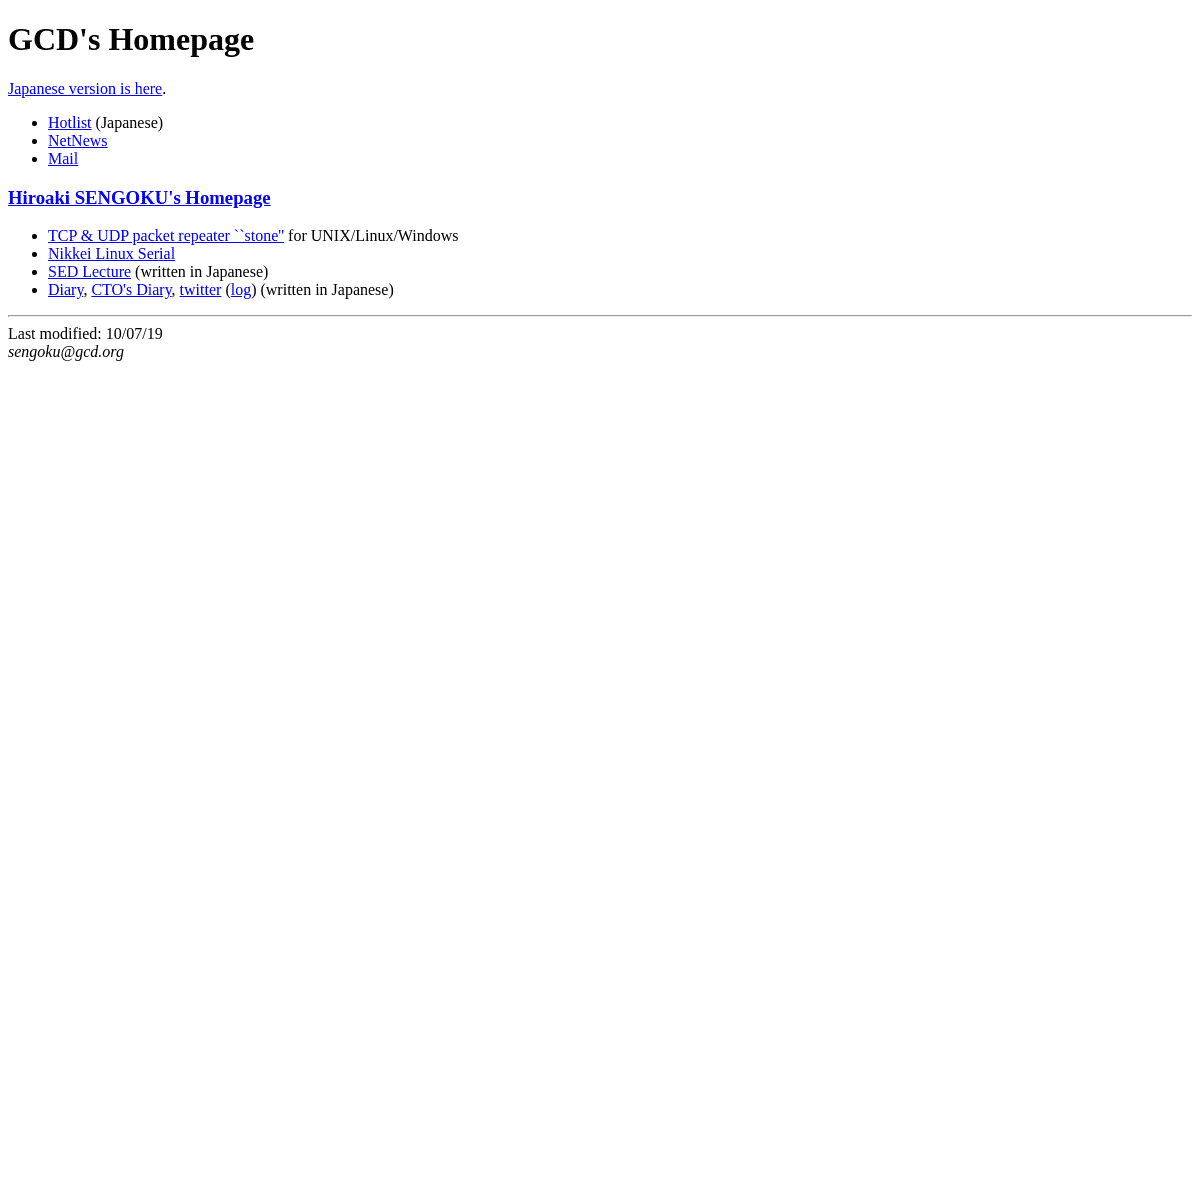 A complete backup of https://gcd.org